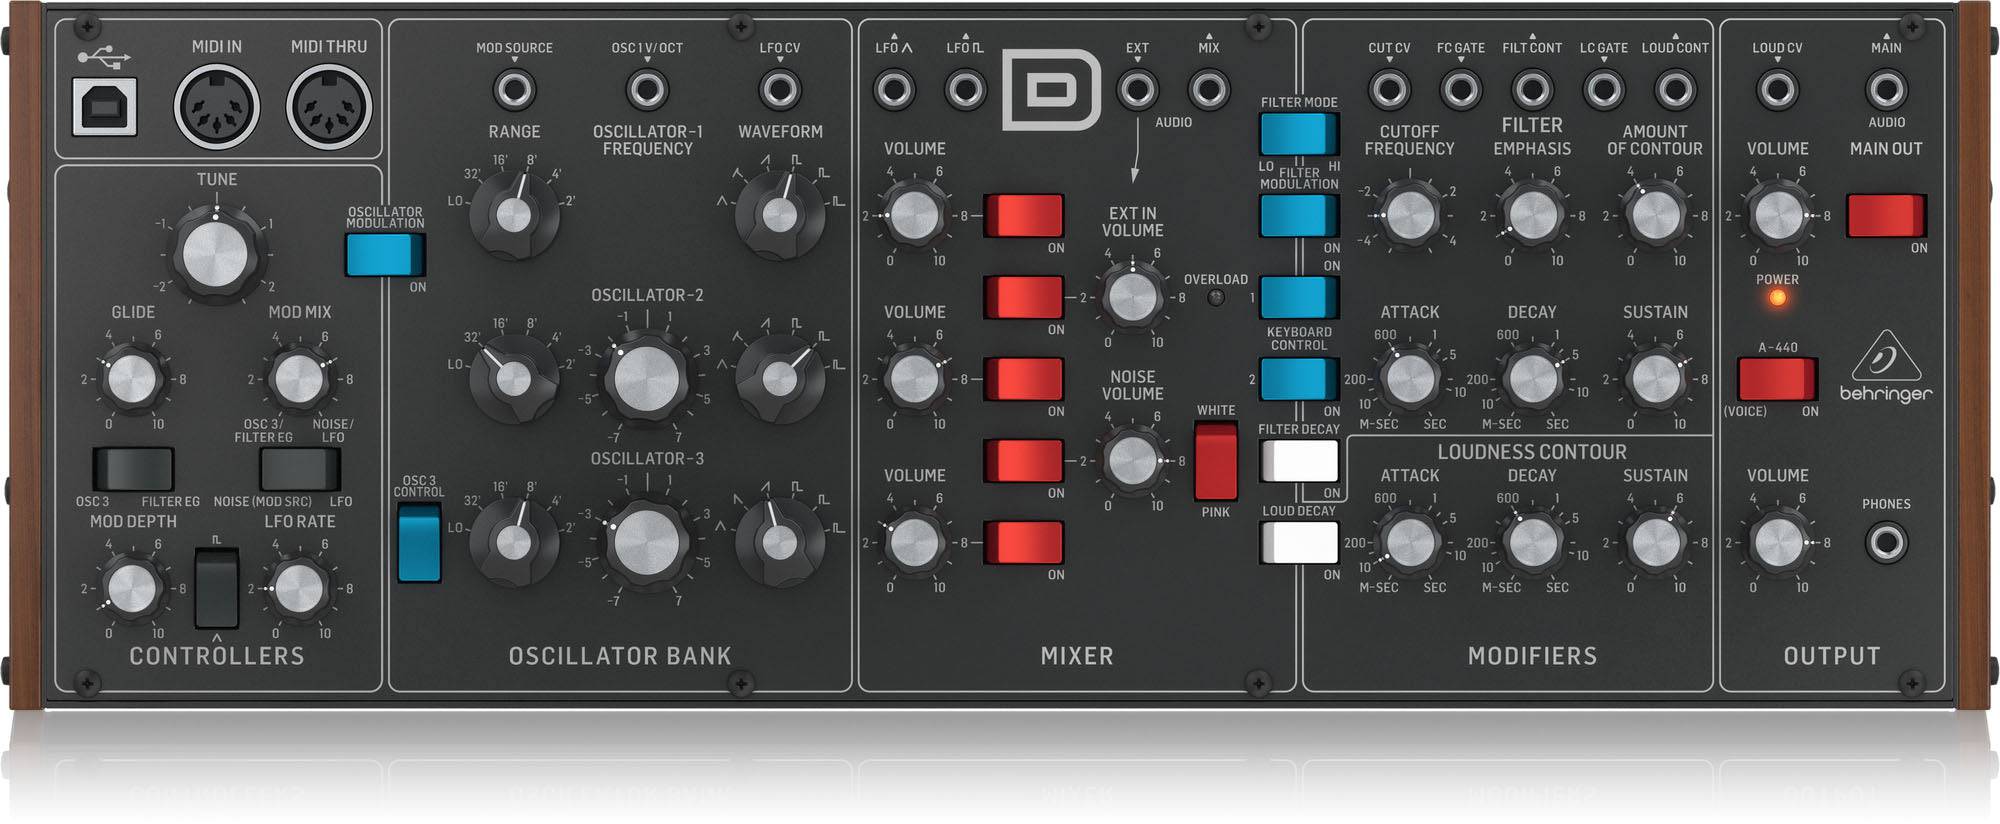 Behringer MODELD, Authentic Analog Synthesizer With 3 Vcos, Ladder Filter, LFO And Eurorack Format - Open Box - Hollywood DJ